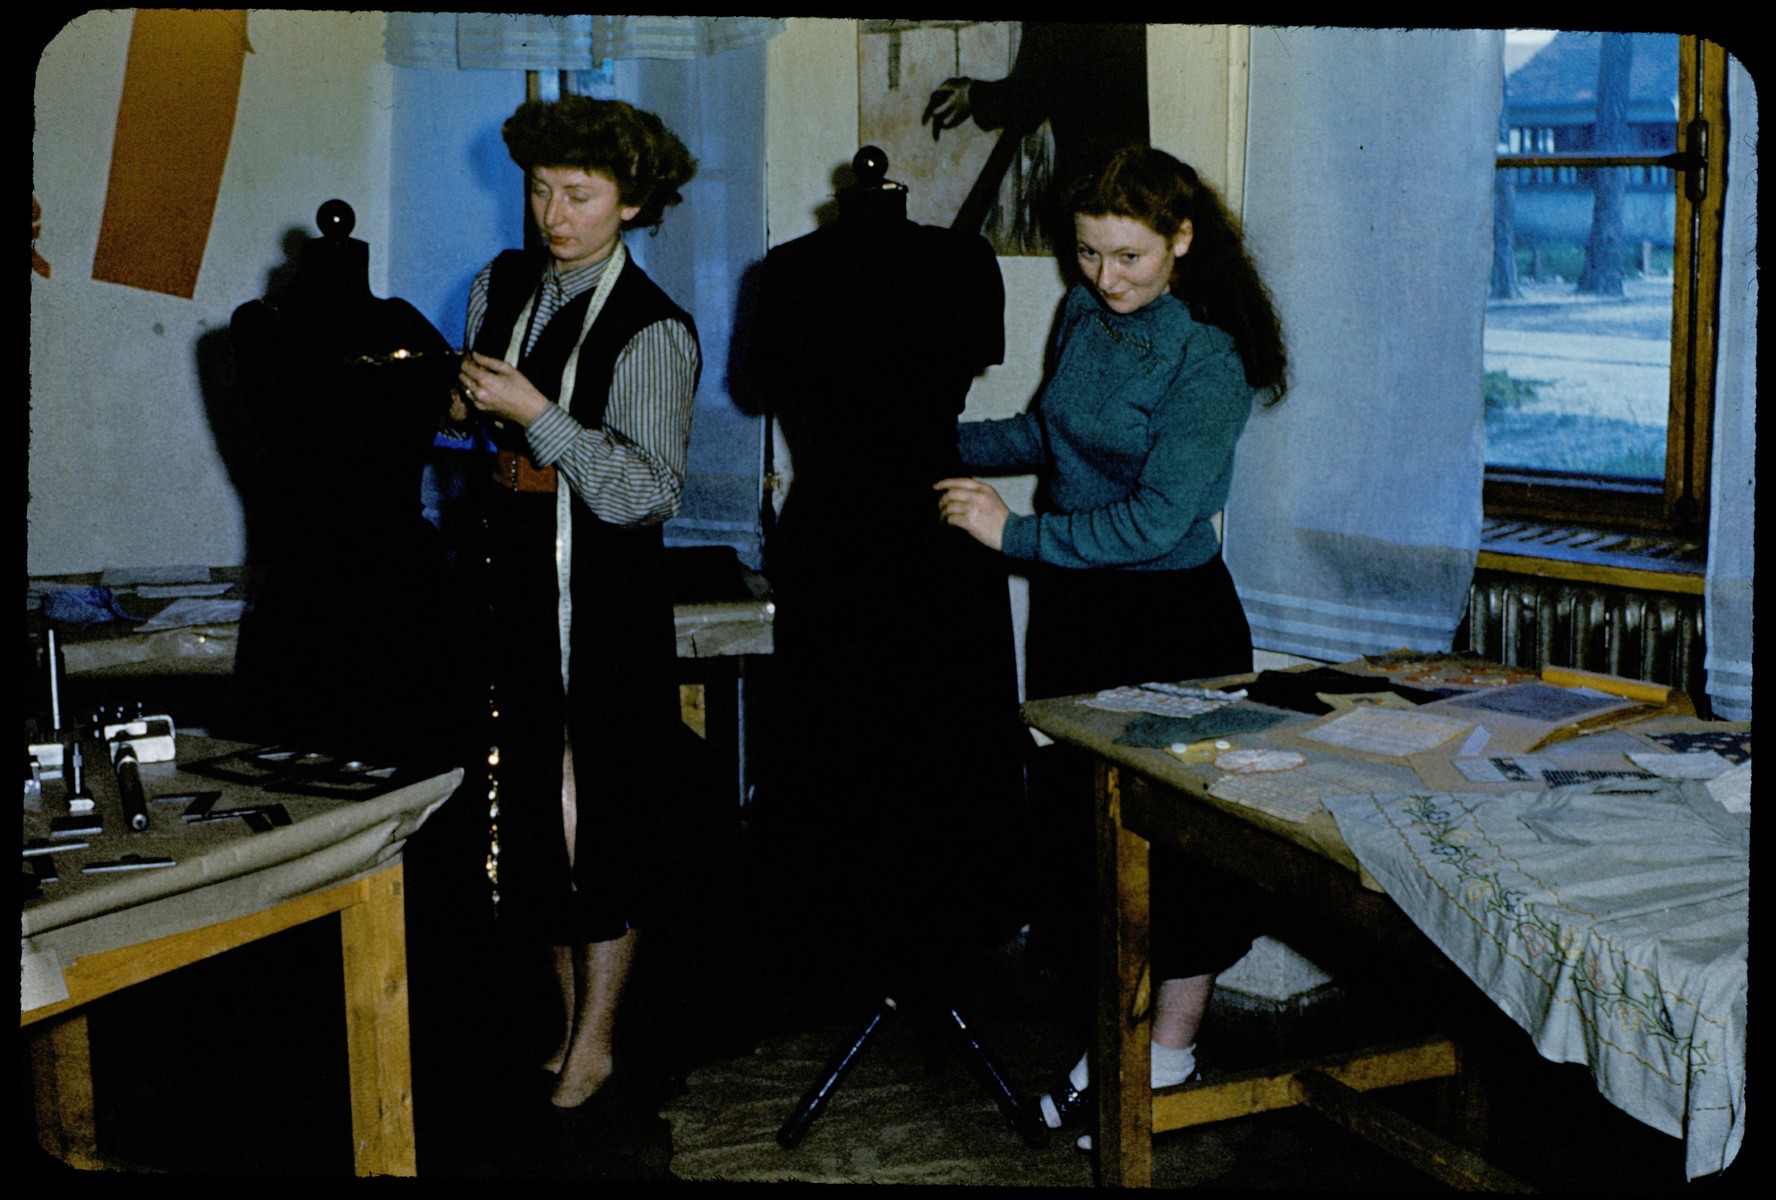 Women learn dressmaking at an ORT vocational training school in the Foehrenwald displaced persons camp.

Standing on the right is Brenda Maryles (nee Soroka) and the woman on the left is the instructor.